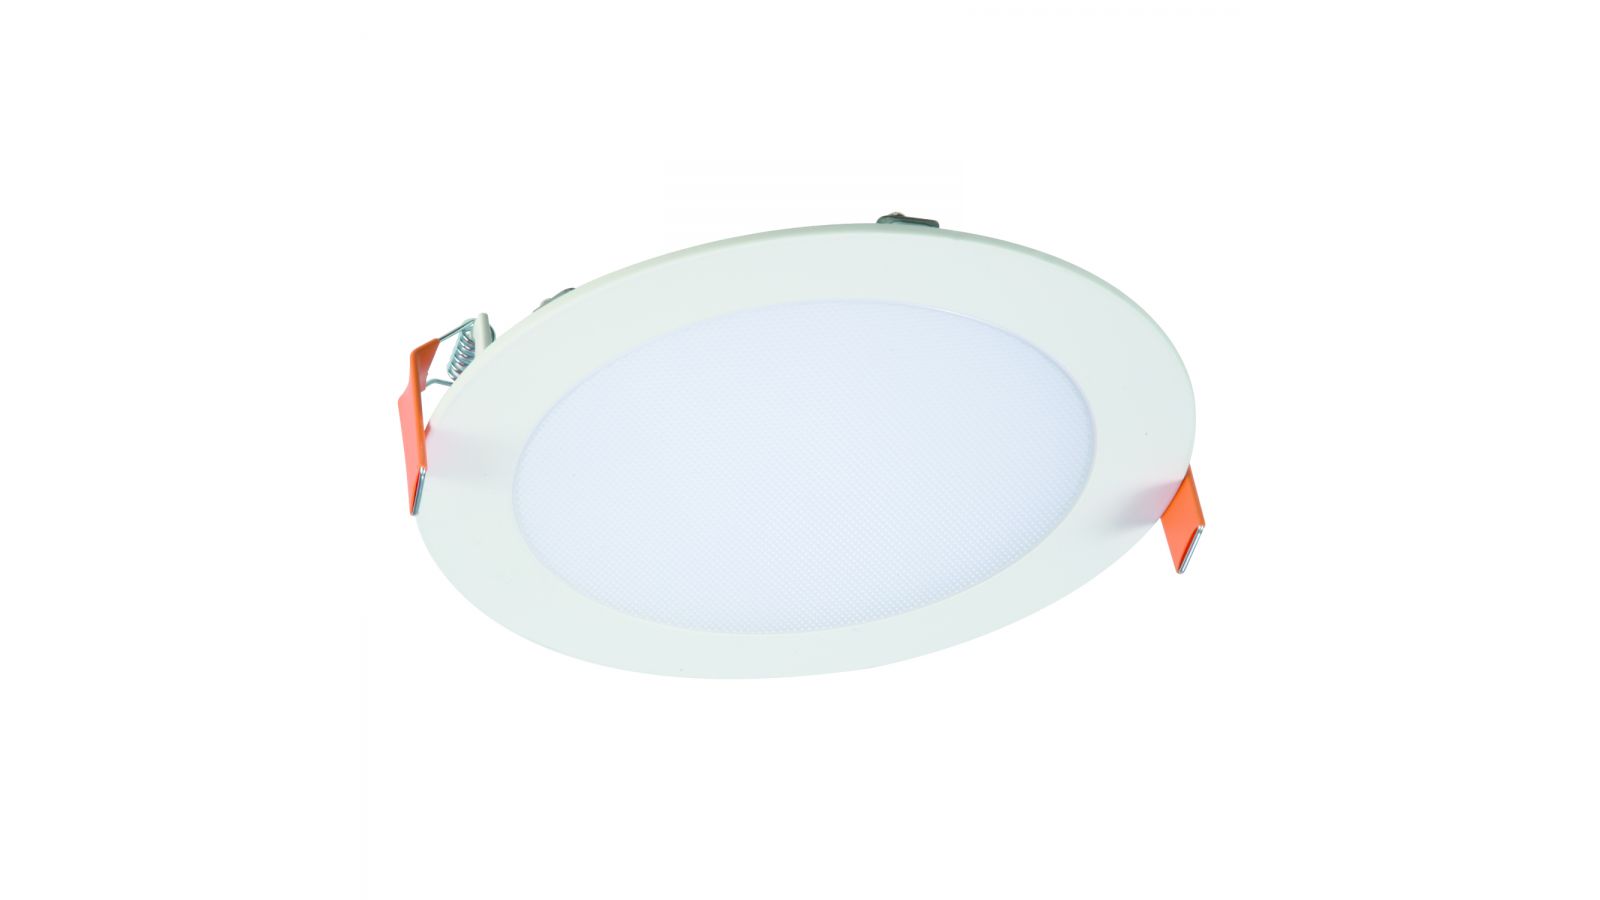 Halo MicroEdge HLB LED Ultra-Thin Recessed Downlight